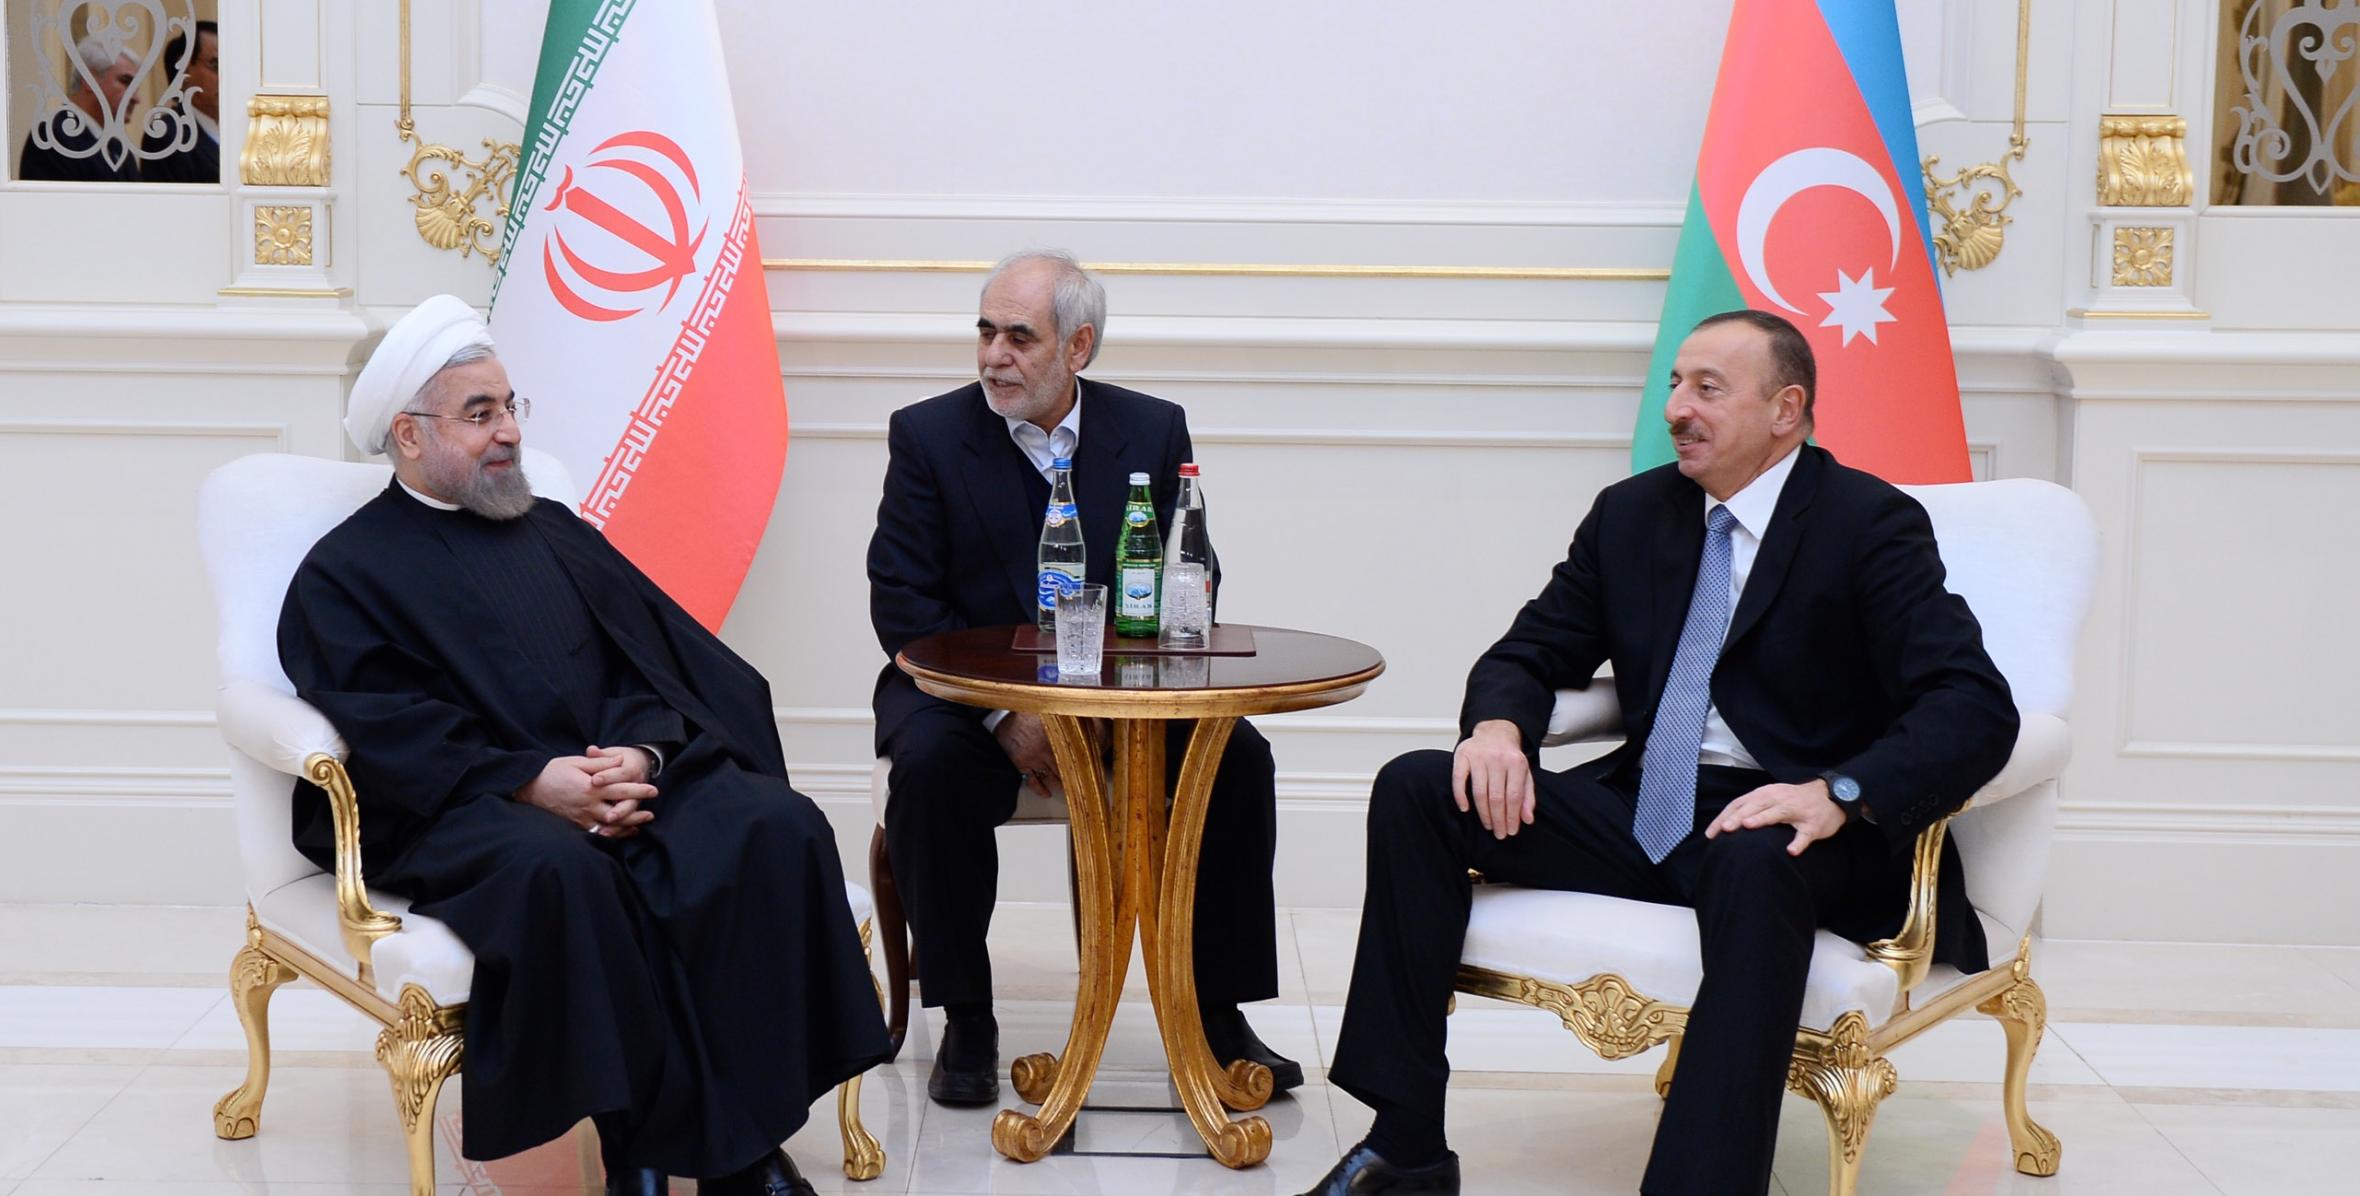 Ilham Aliyev and President Hassan Rouhani met one-on-one